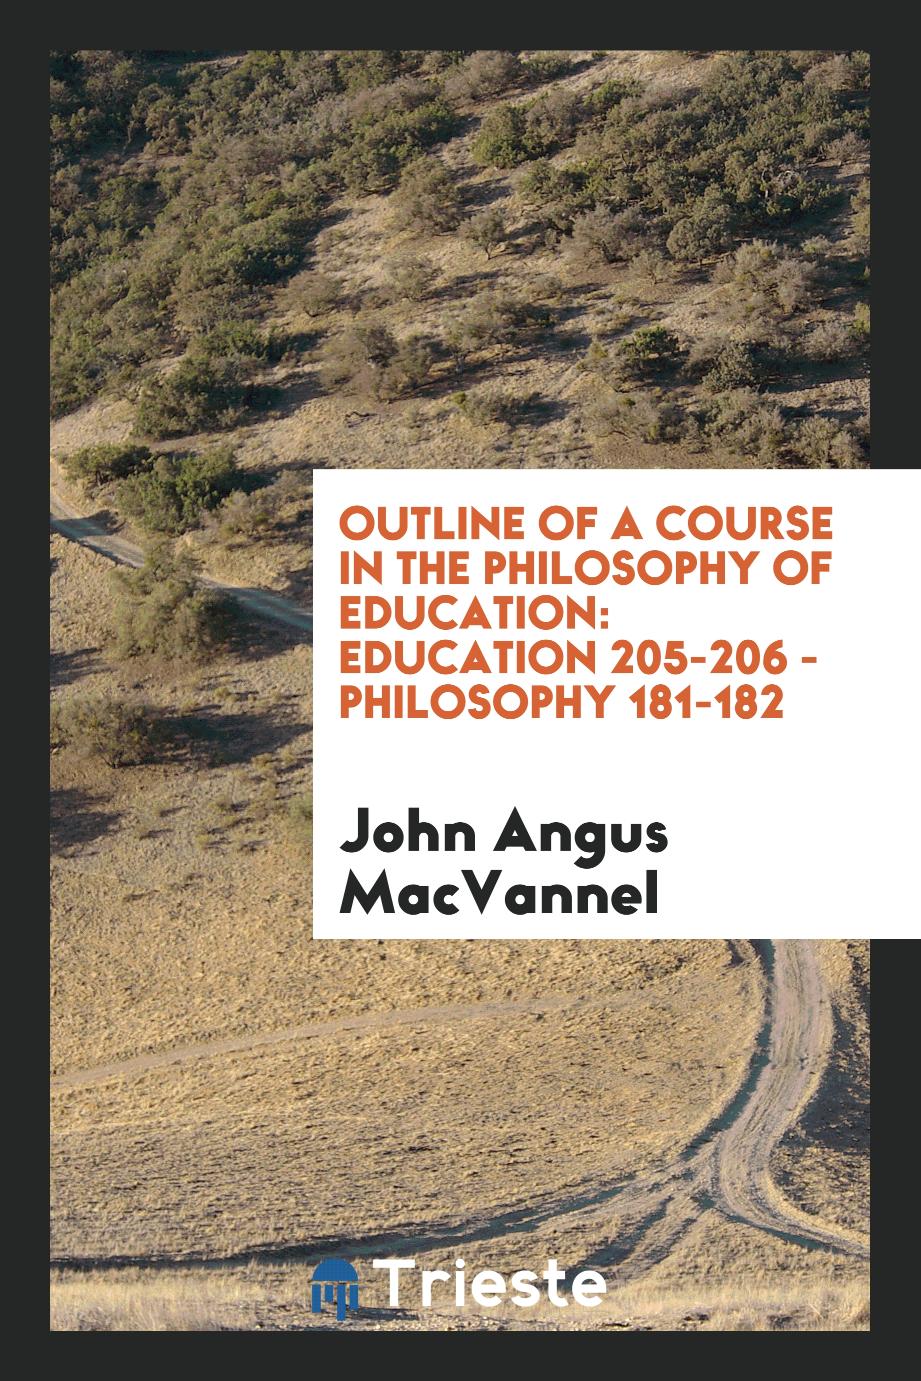 Outline of a course in the philosophy of education: Education 205-206 - Philosophy 181-182